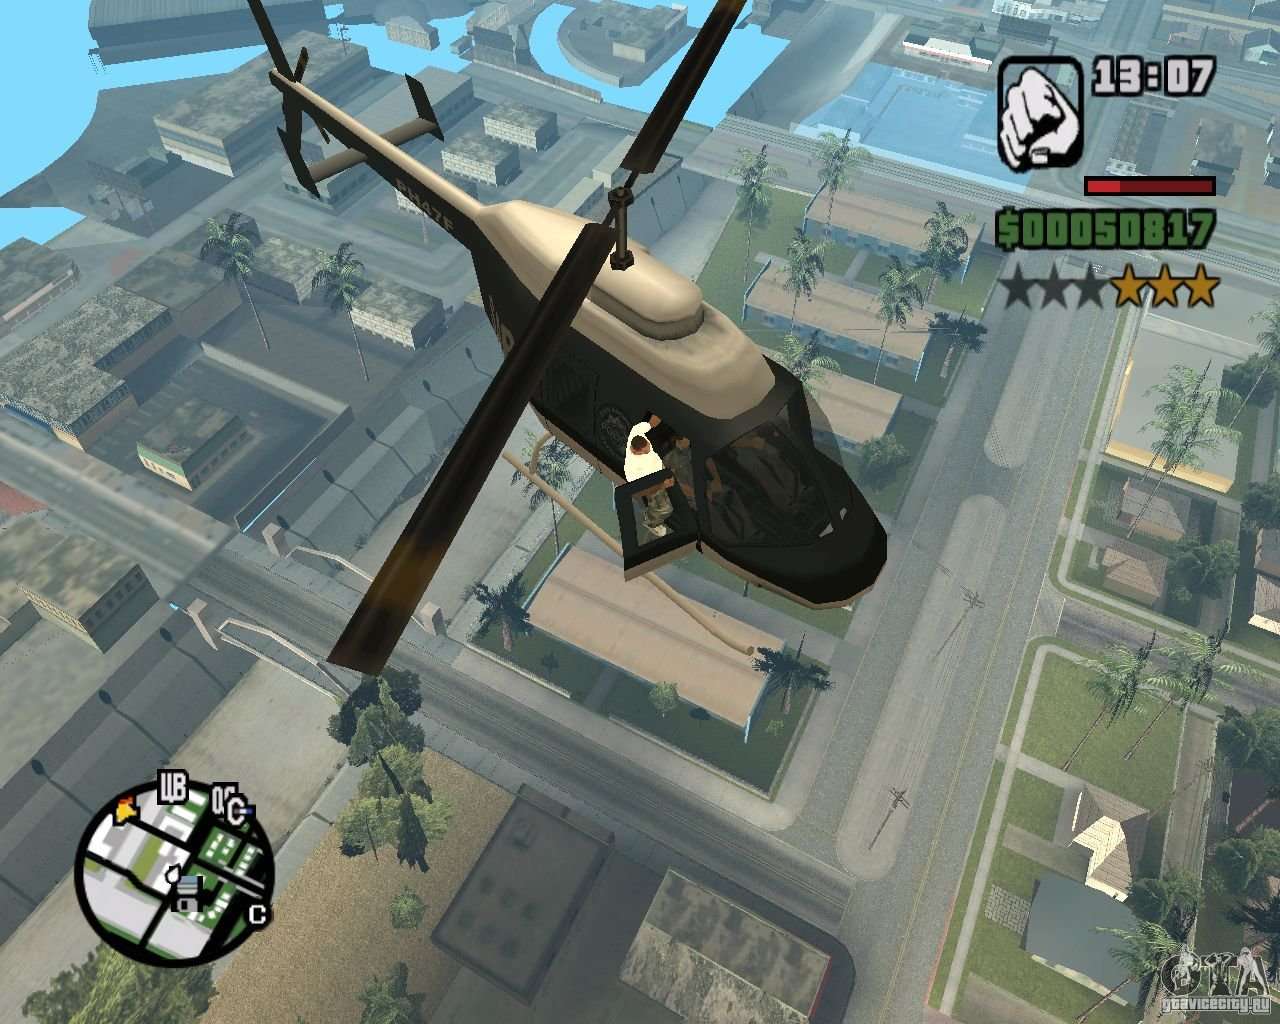 HELICOPTER GRAB MOD! - GTA Vice City Best Mods 6 